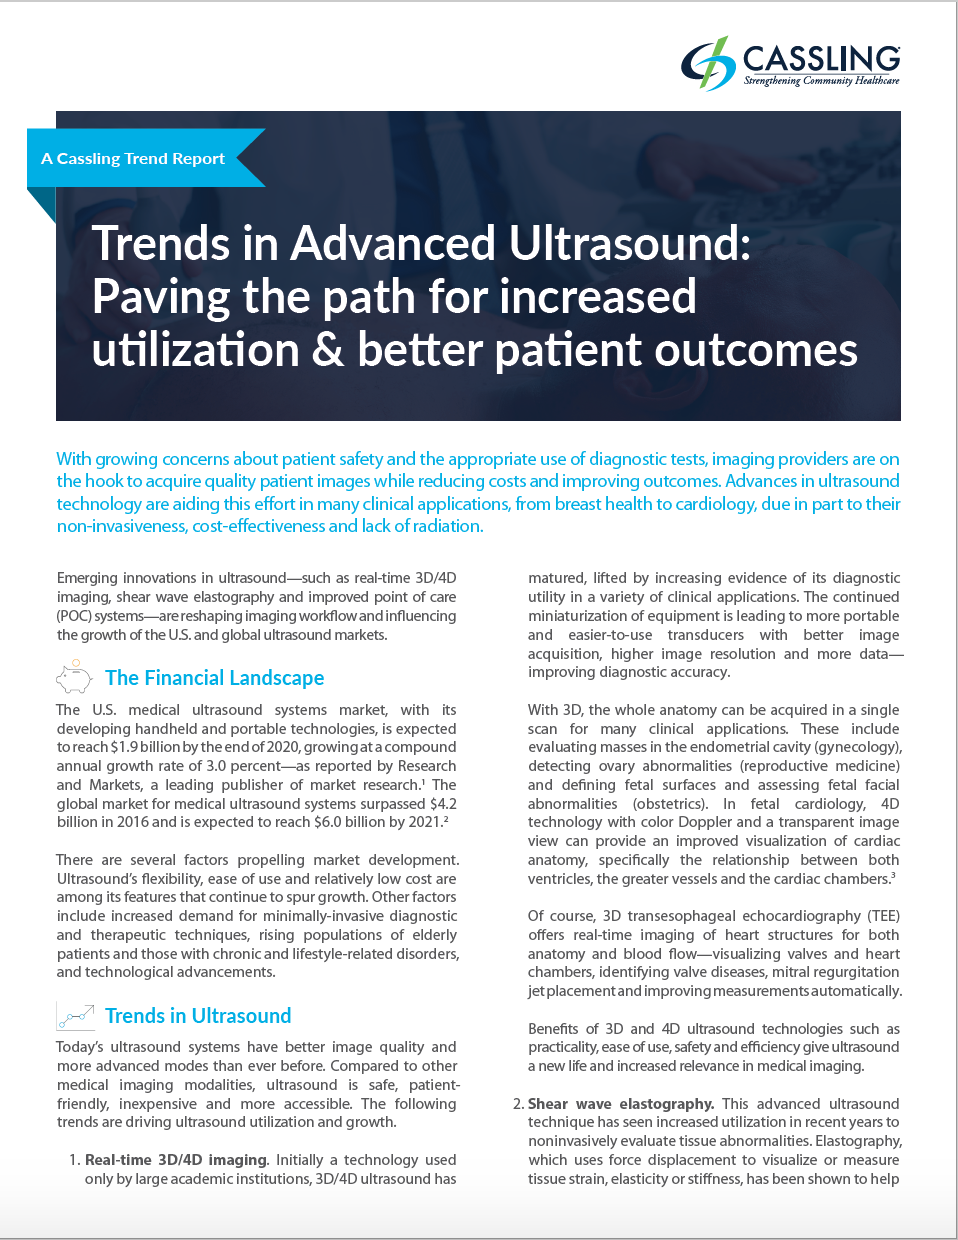 Trends-Ultrasound-report.png